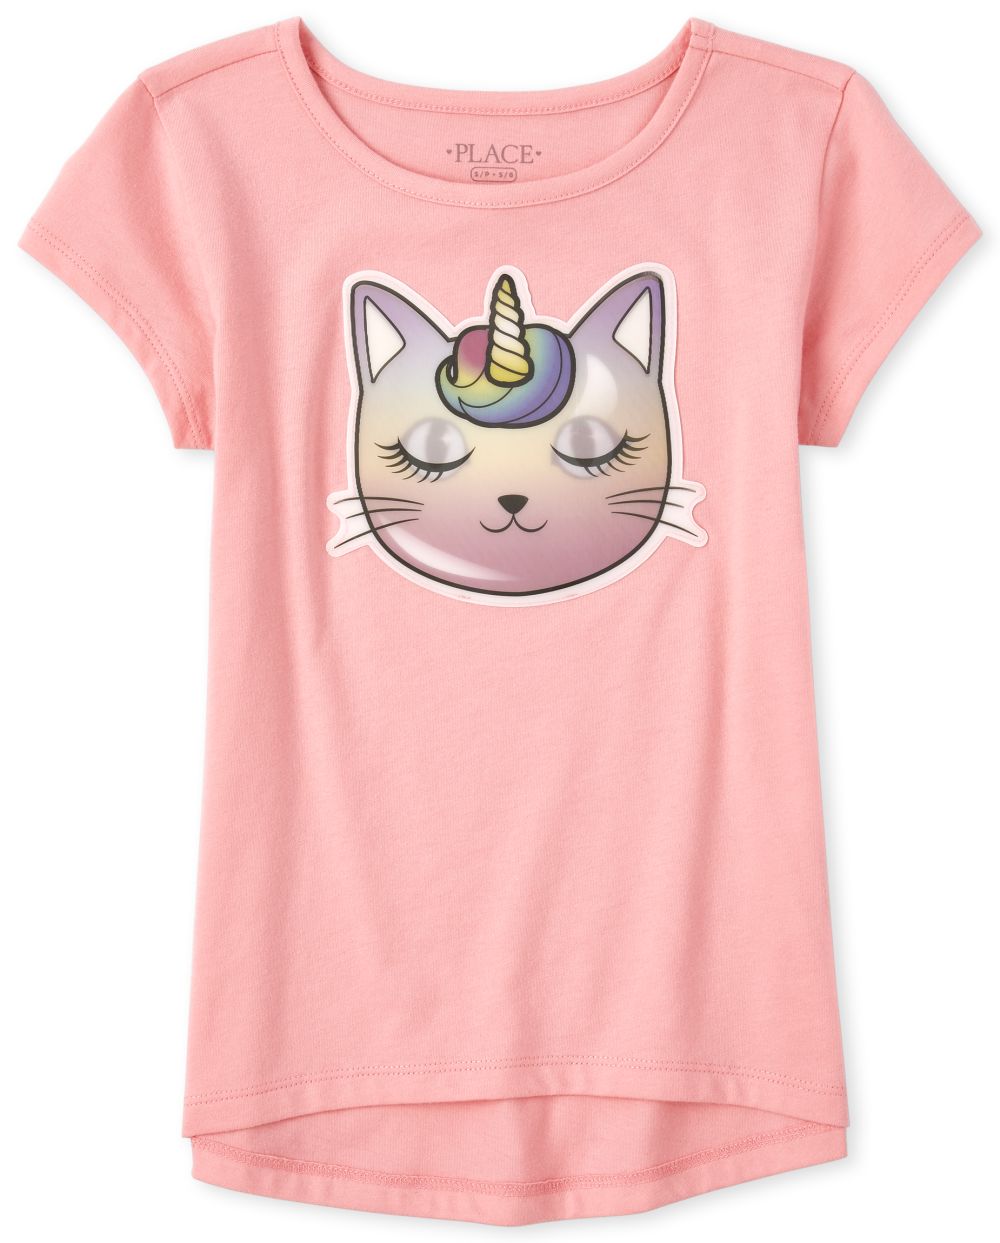 Girls Short Sleeve Holographic Lenticular Caticorn Graphic Top